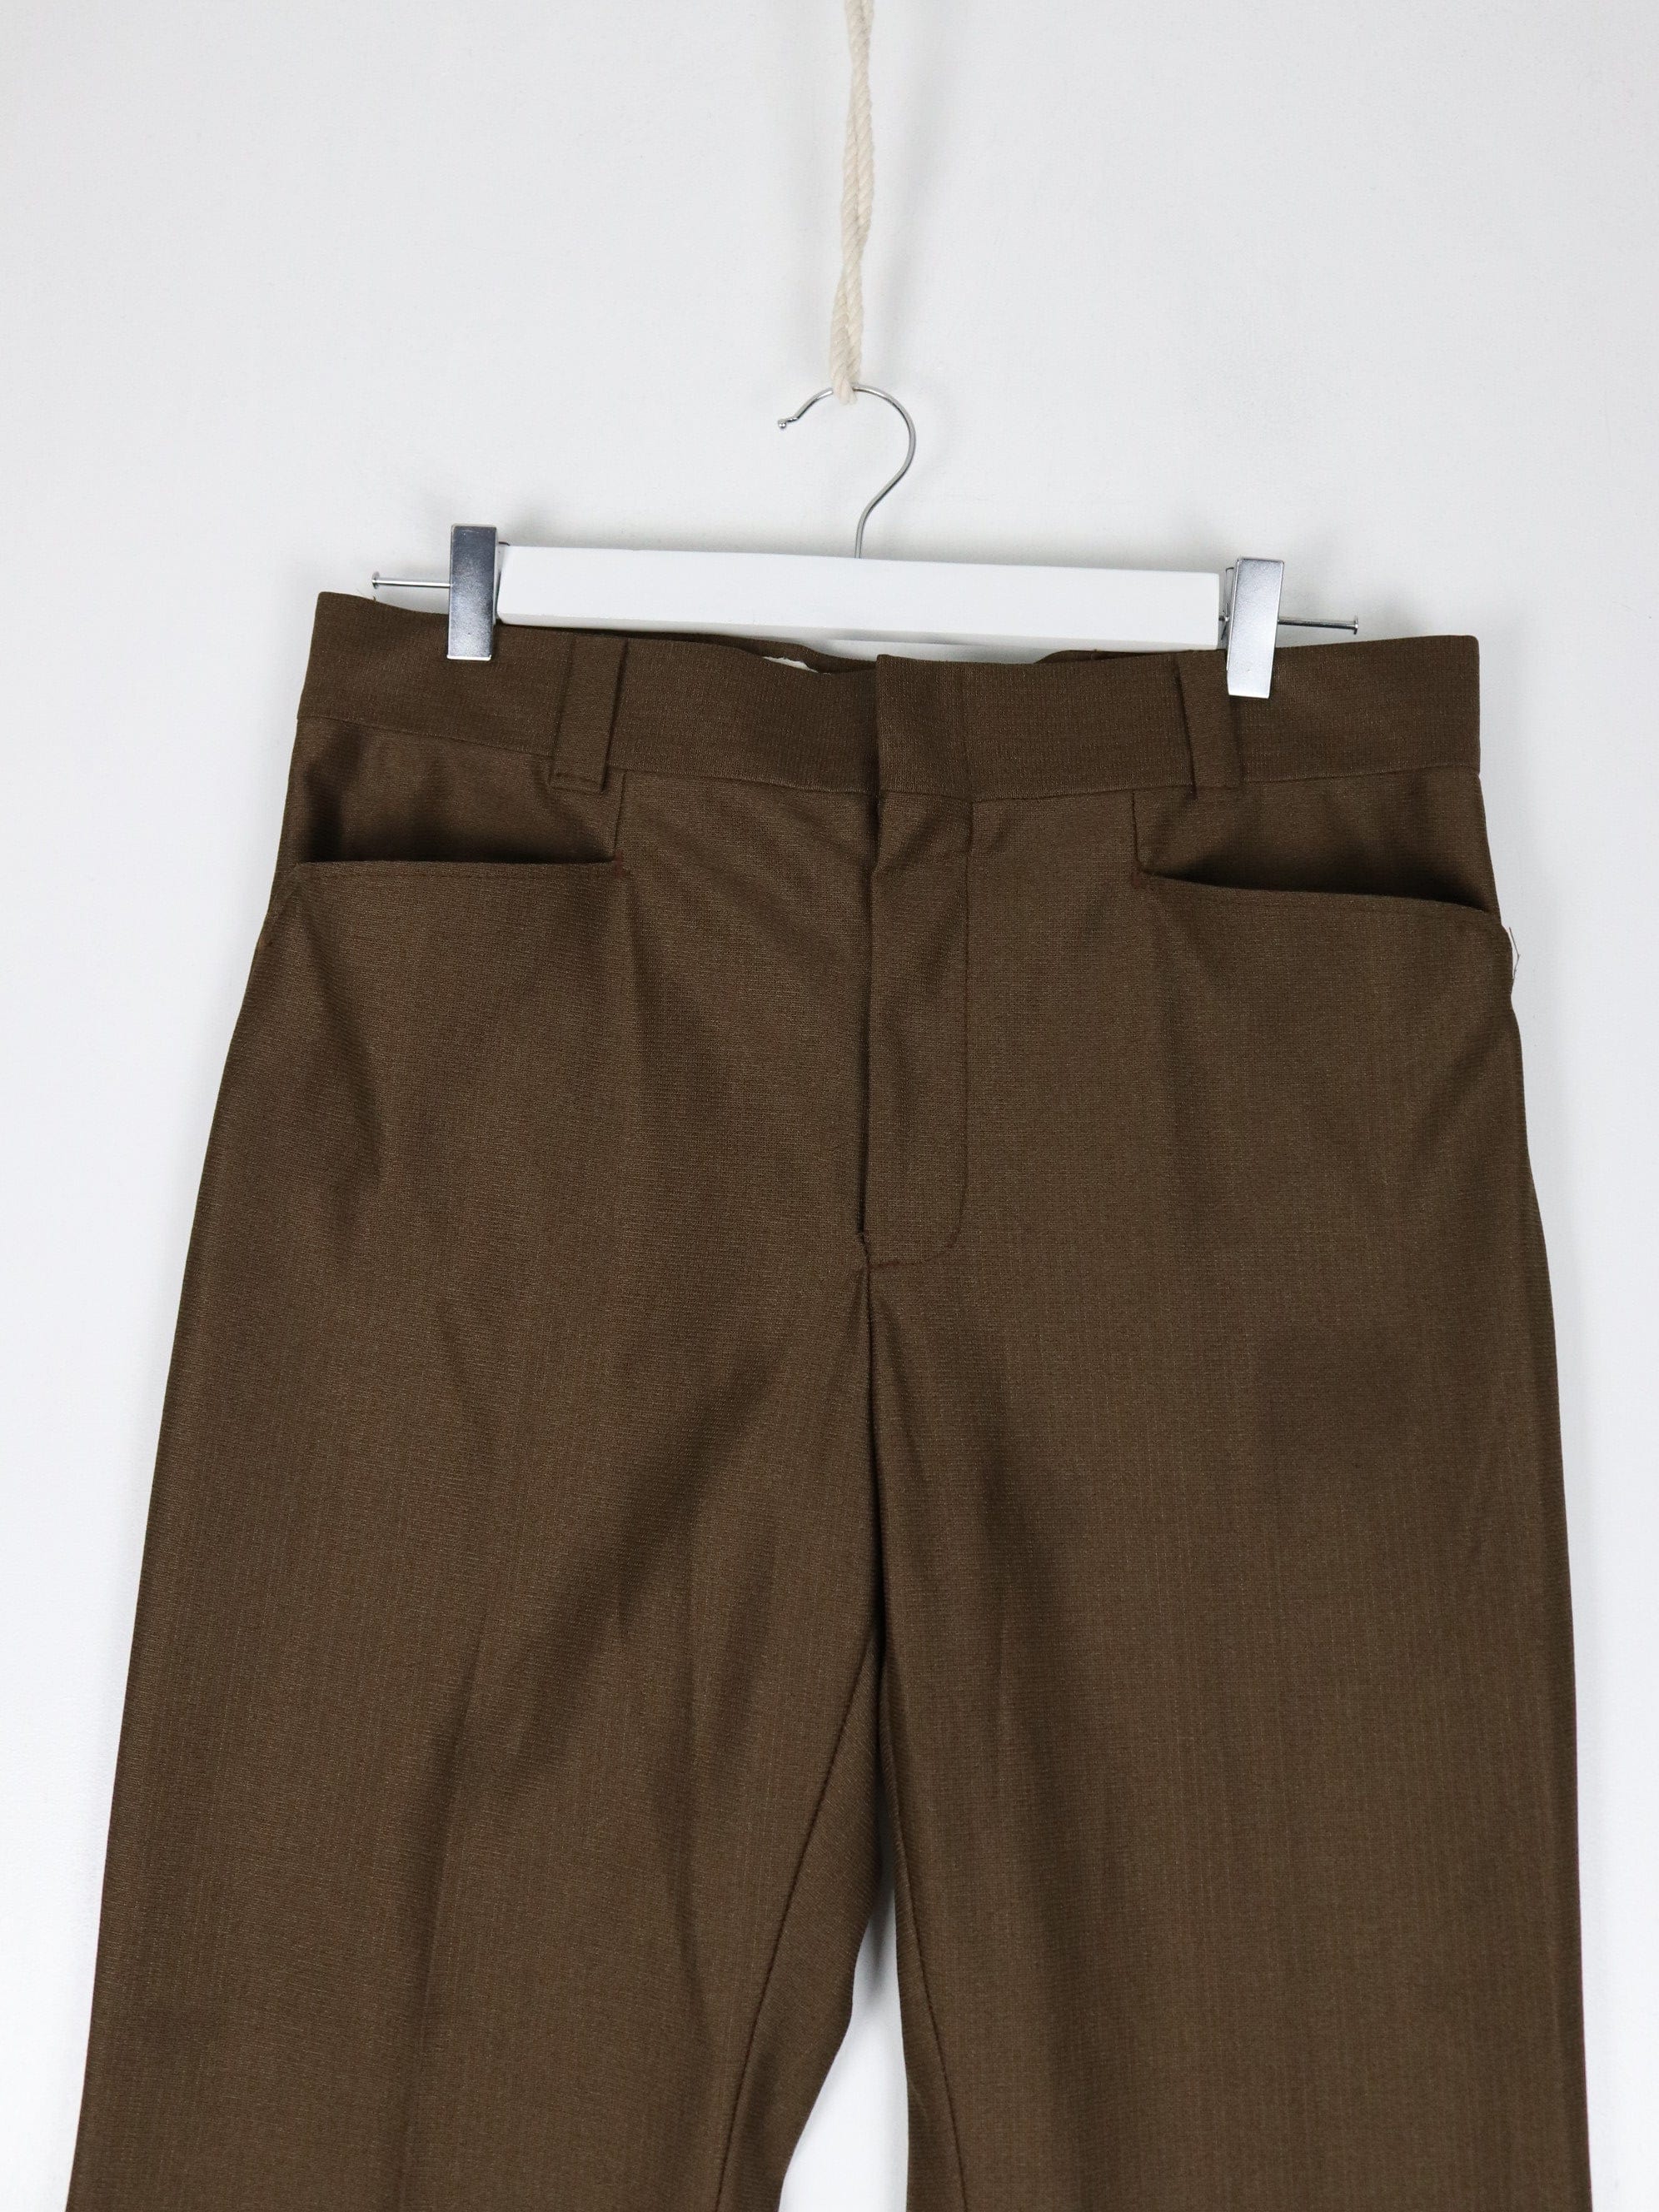 Vintage Dress Pants Mens 36 x 33 Green Pleated Trousers 70s 80s